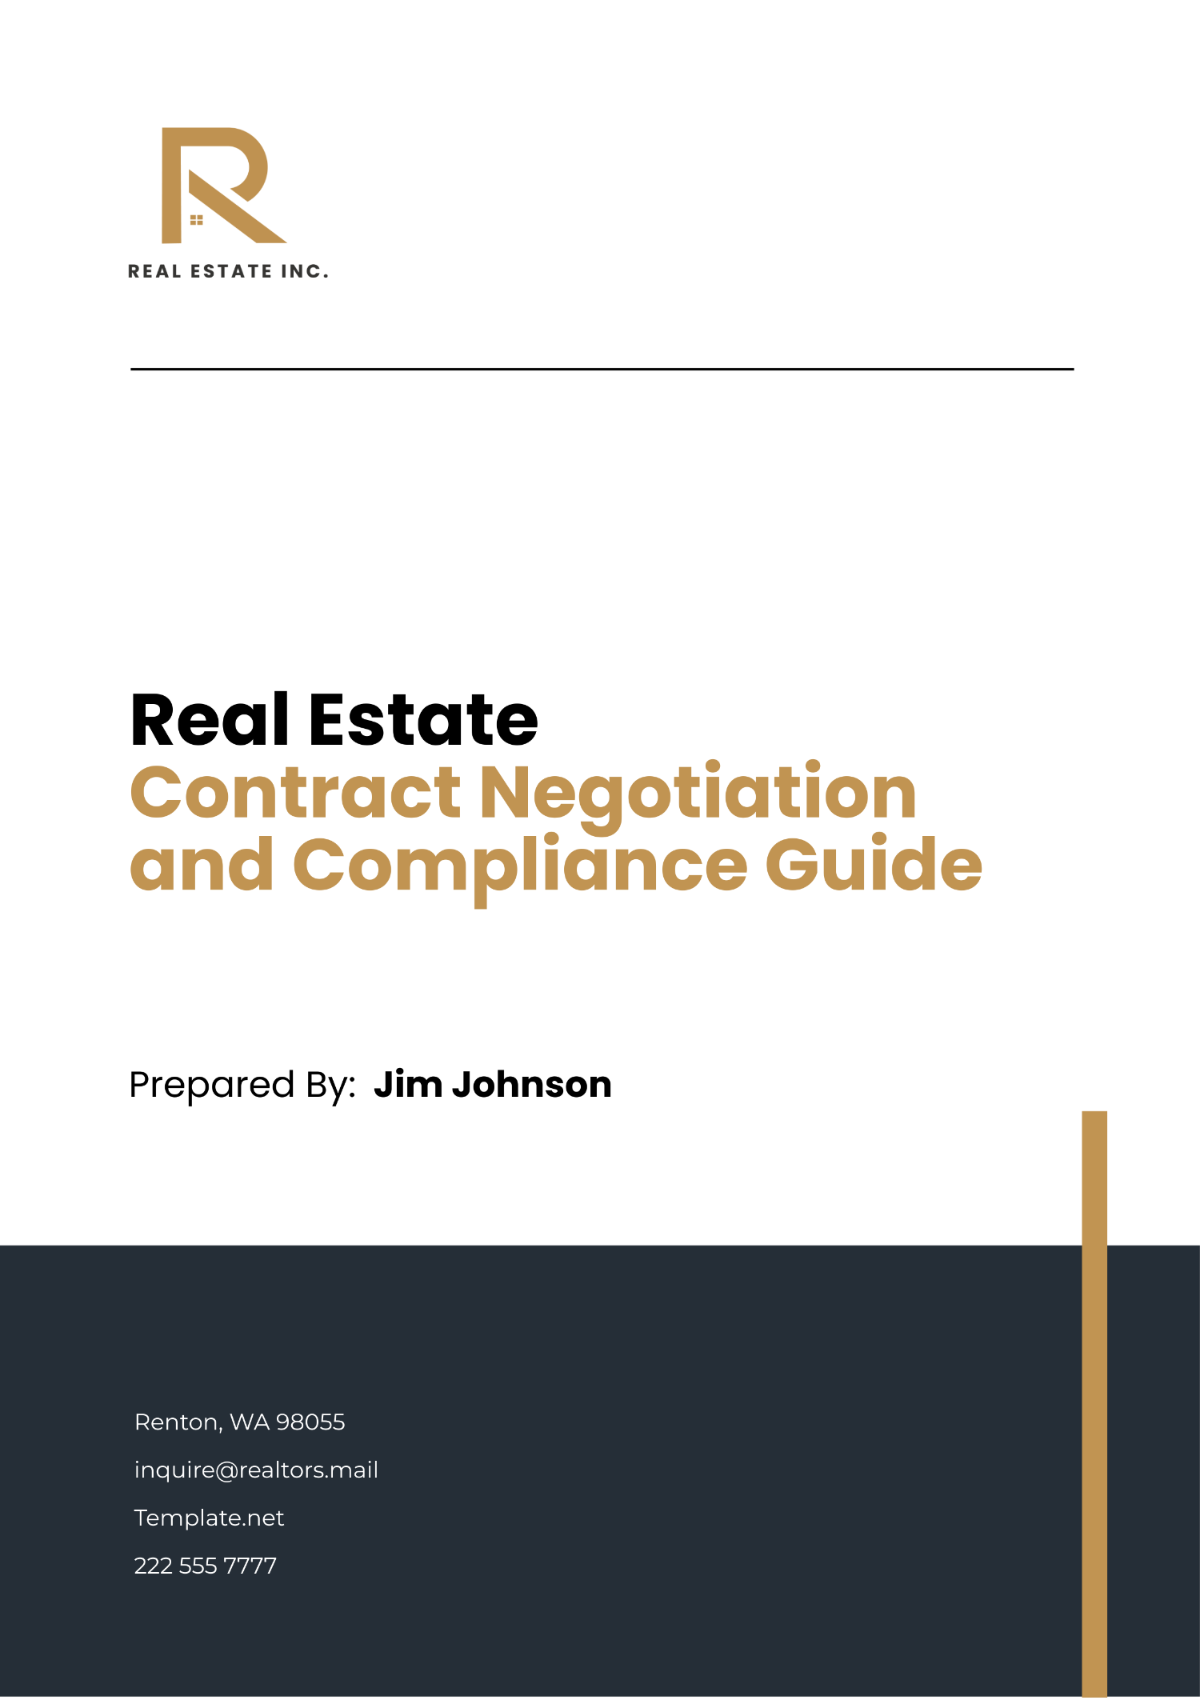 Free Real Estate Contract Negotiation and Compliance Guide Template